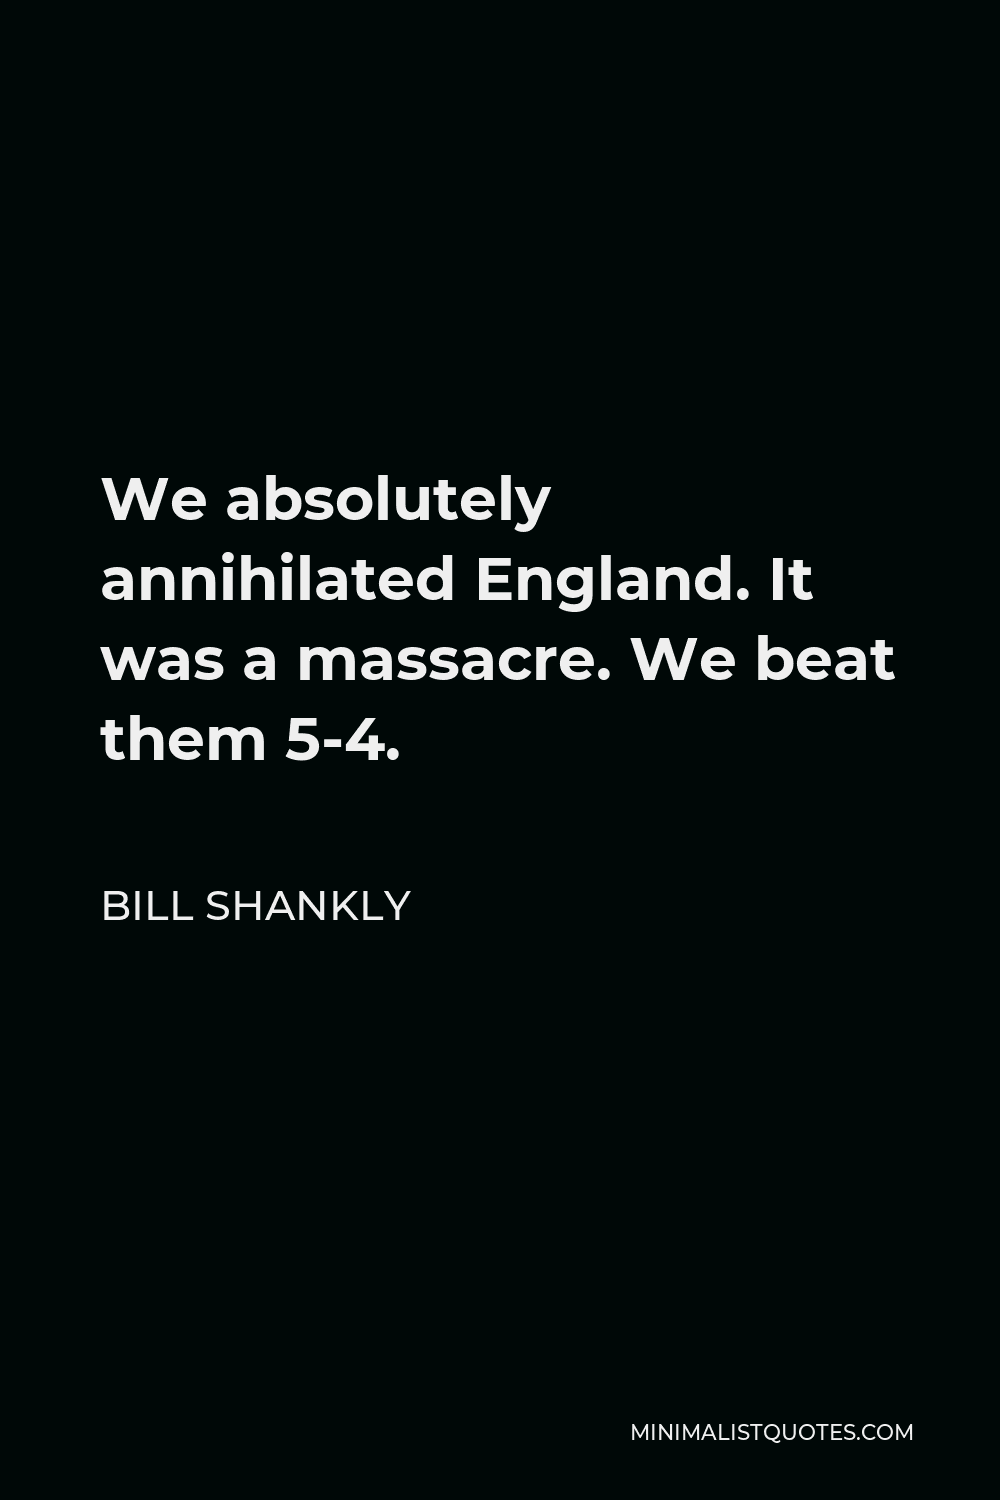 Bill Shankly Quote - We absolutely annihilated England. It was a massacre. We beat them 5-4.